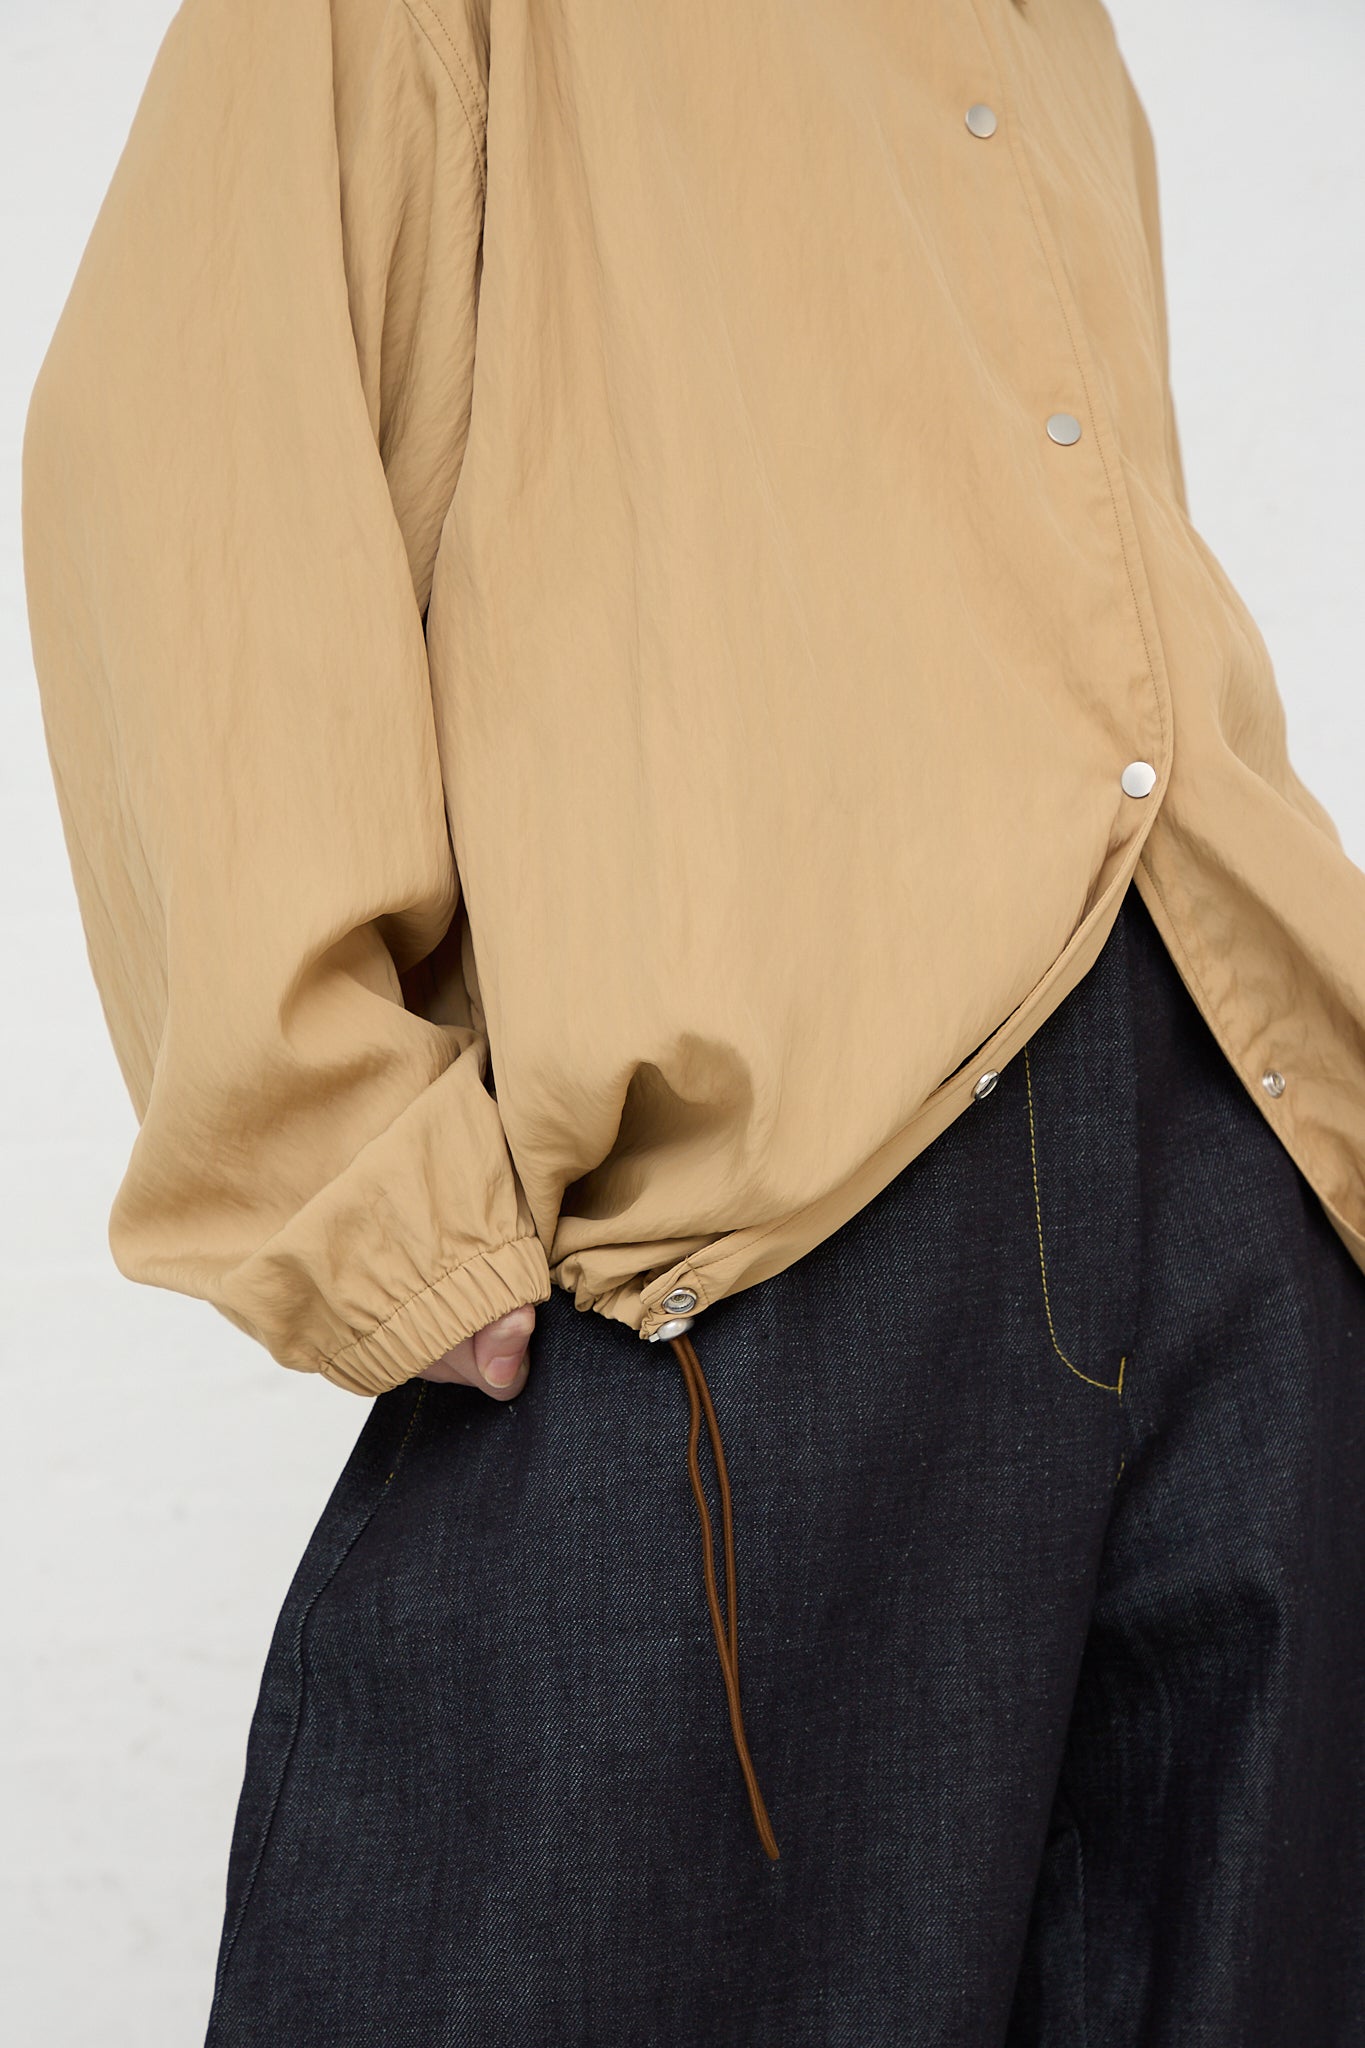 A woman wearing a tan Studio Nicholson Sprung Coach Jacket in Sand and jeans.